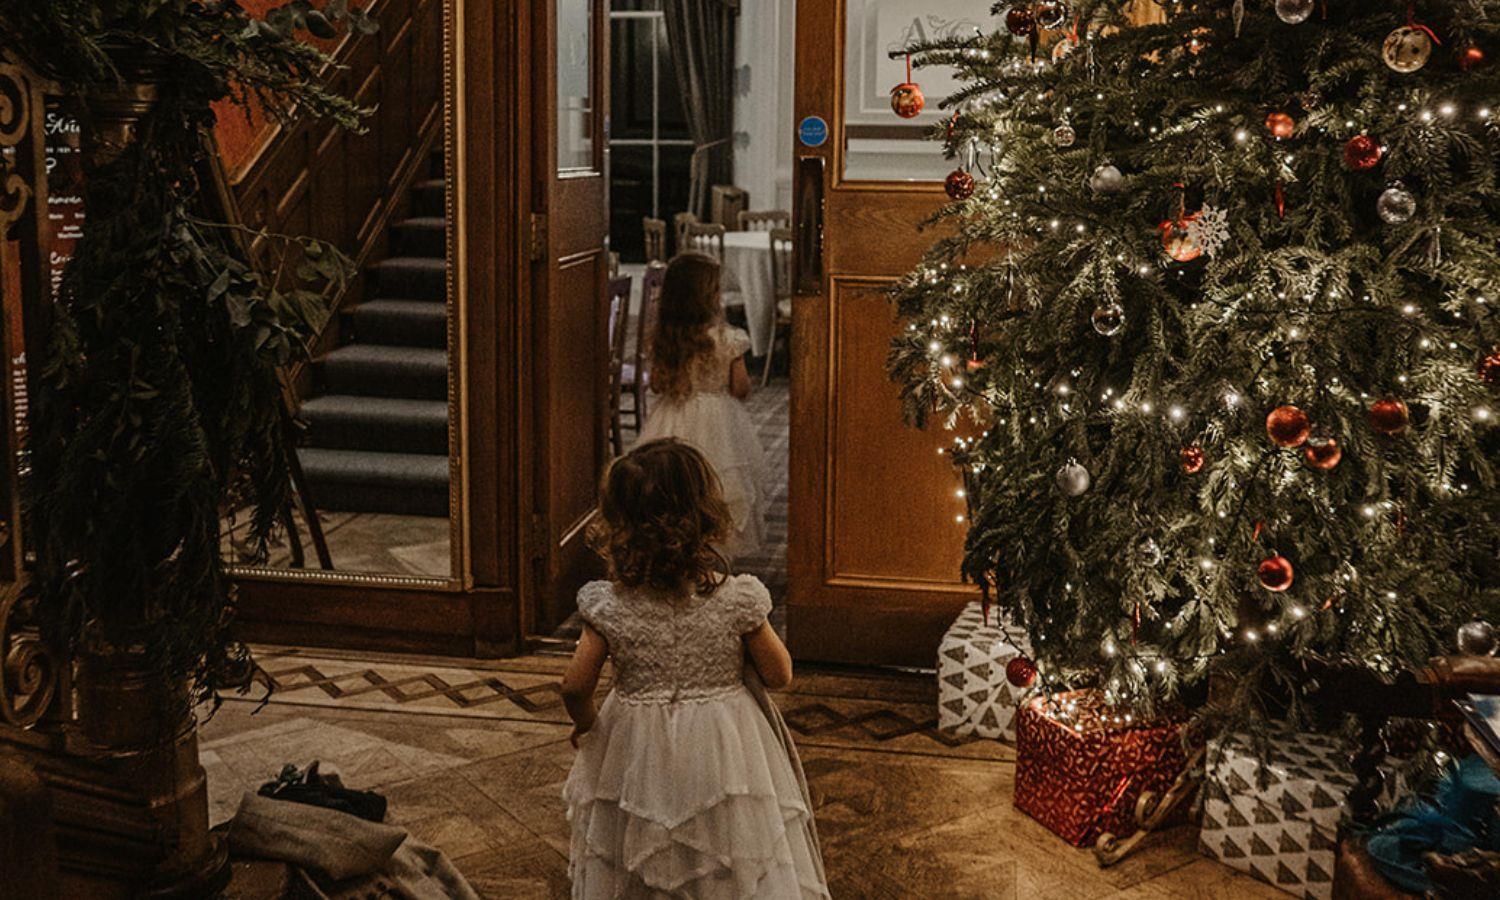 Children walking through hallway filled with Christmas decorations